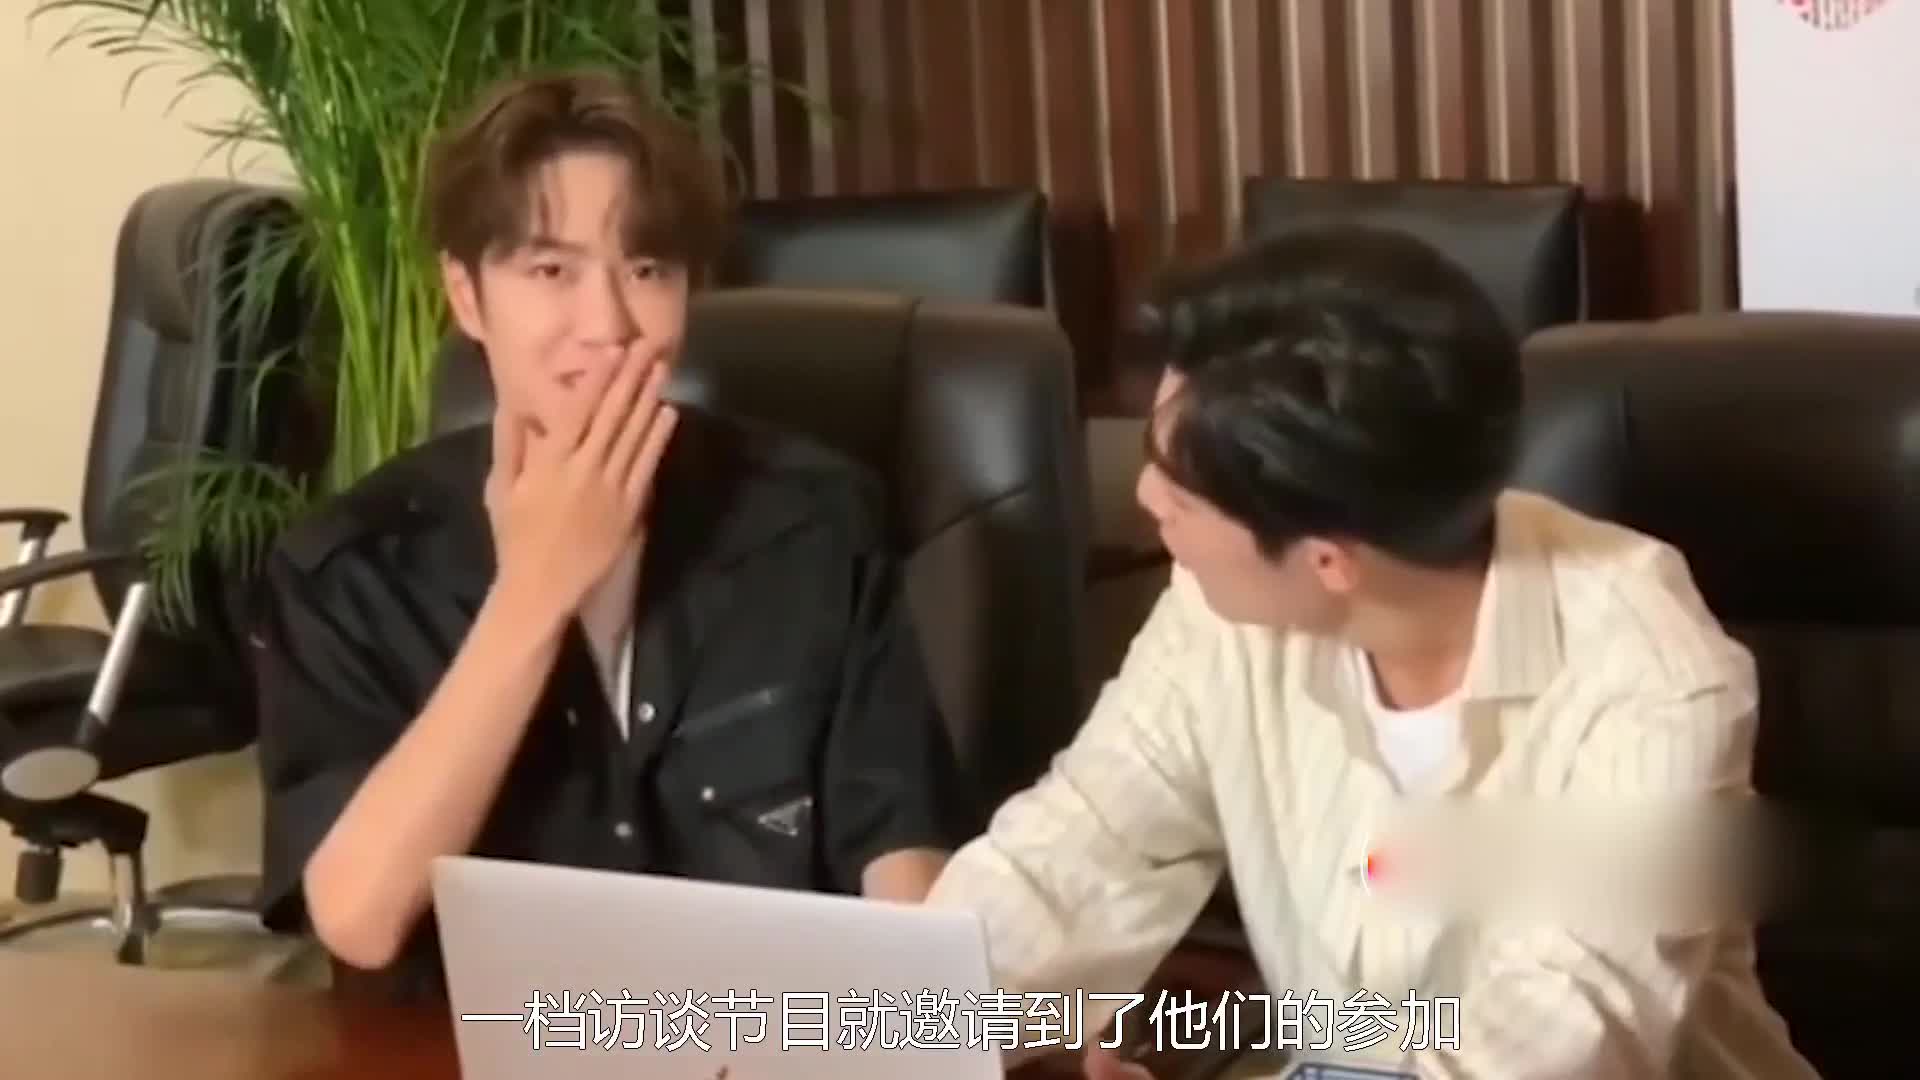 Wang Yibo has been peeping at Xiao Zhan in the interview. Xiao Zhan's subconscious reaction makes the director unable to see it.